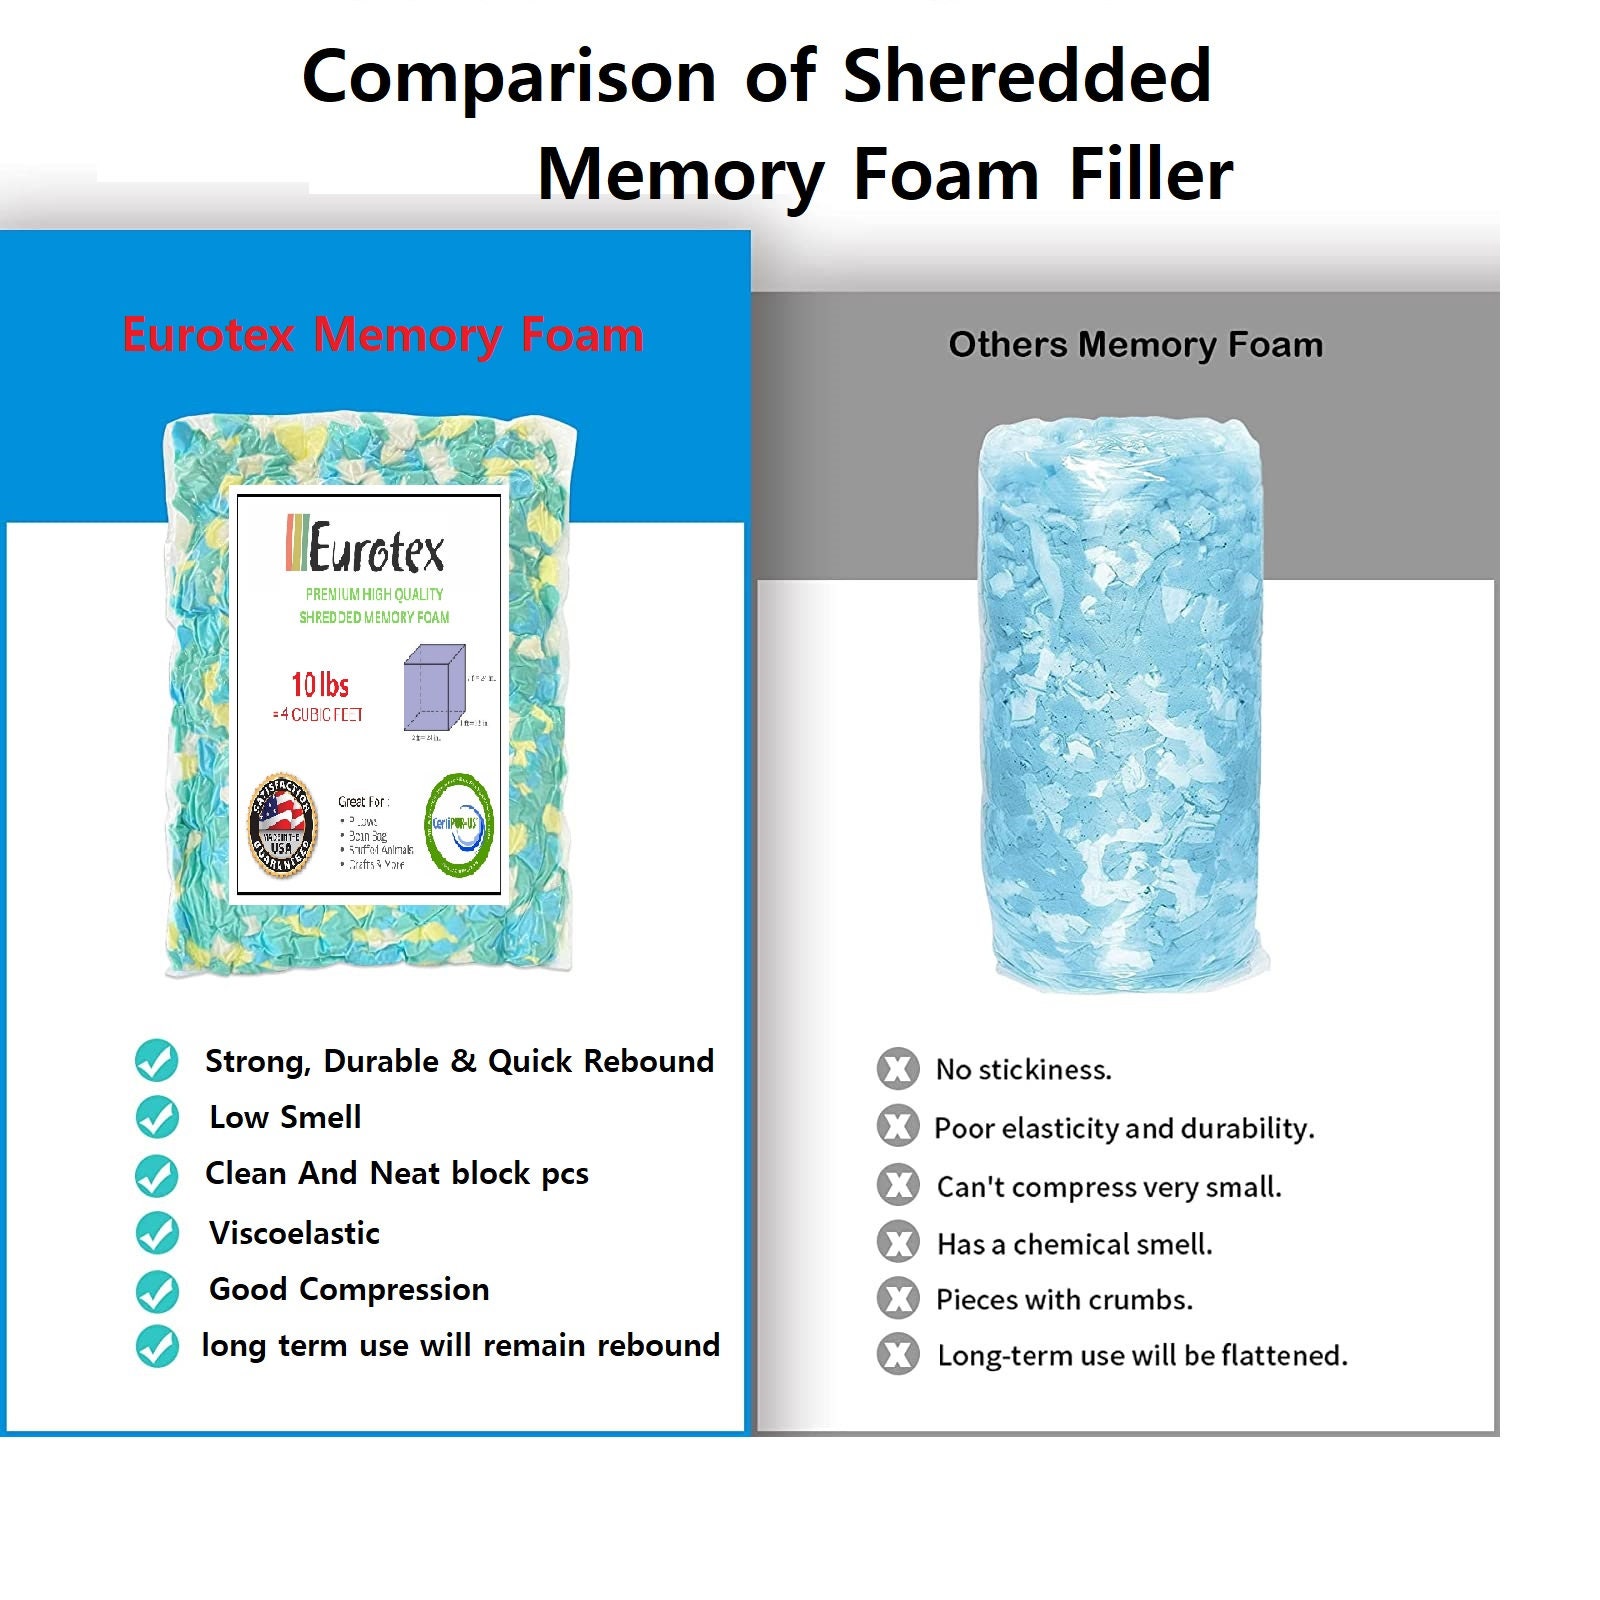 Eurotex Shredded Memory Foam Filling 2.5 lbs for Bean Bag Filler, Gel Particles Refill, Premium Soft and Comfortable Stuffing